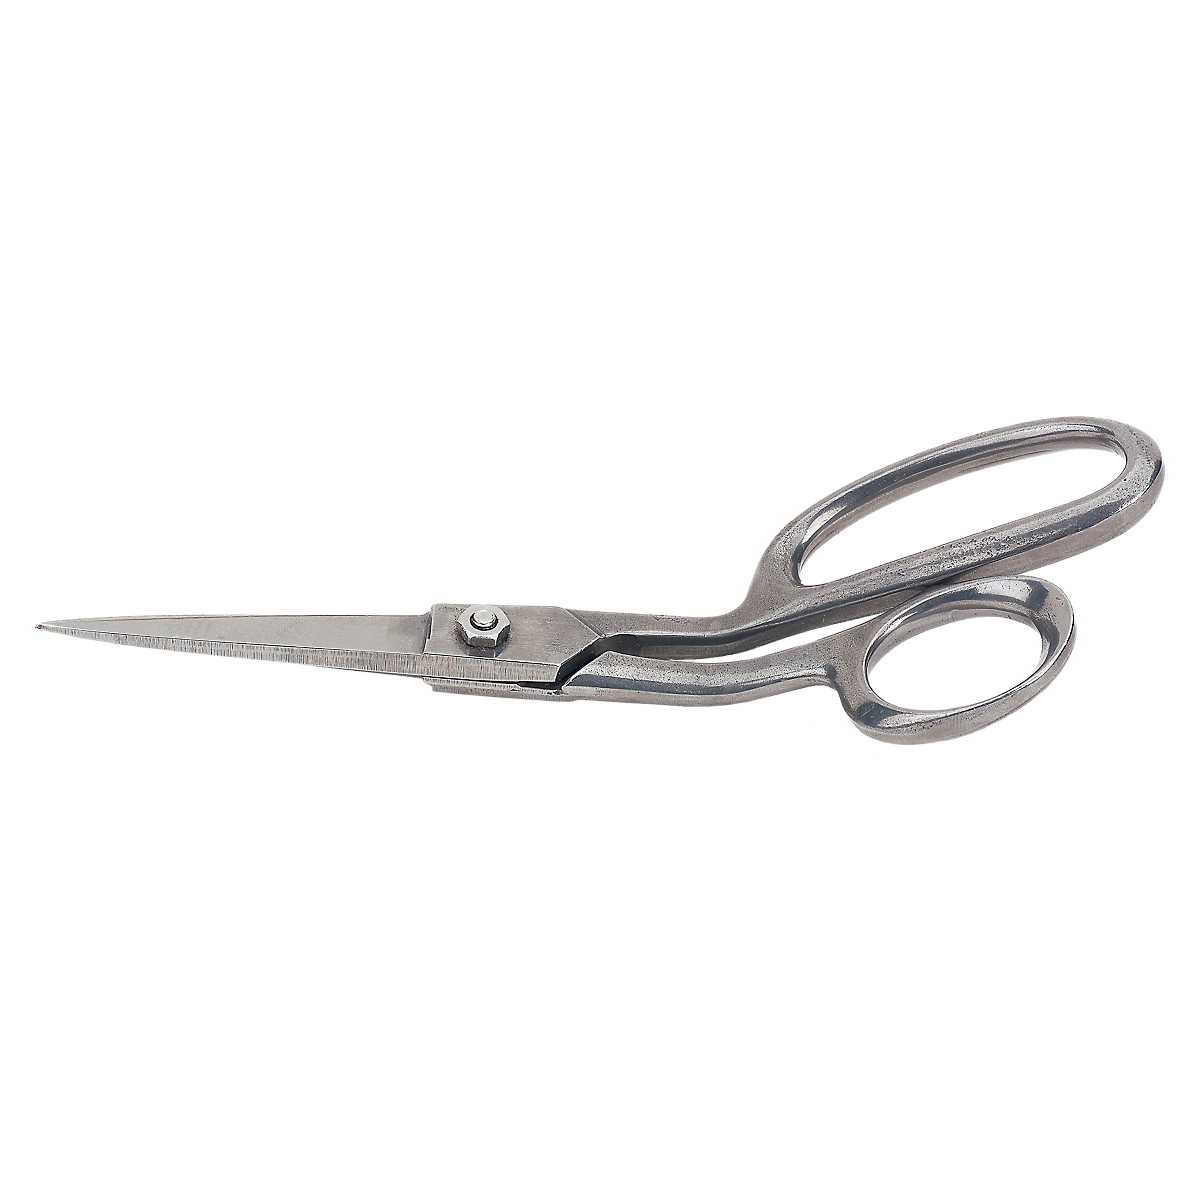 https://rowleycompany.scene7.com/is/image/rowleycompany/rowley-bent-handle-scissors-shears-9in-cu19?$s7Product$&fmt=png-alpha